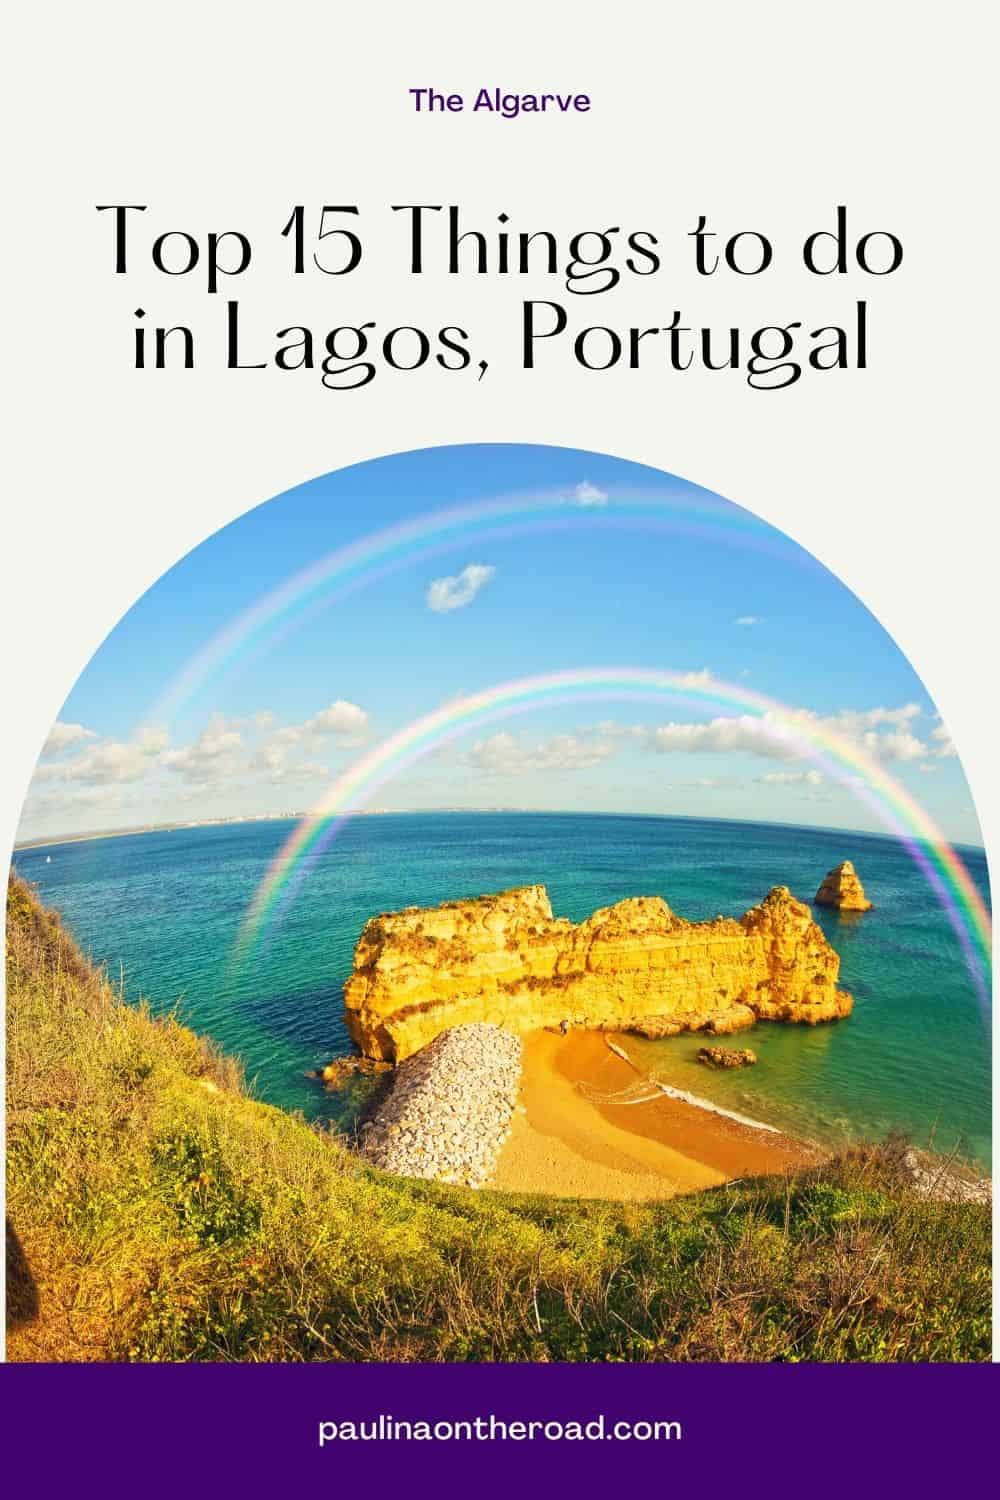 Planning a trip to the beautiful coastal city of Lagos, Portugal in the Algarve? This guide has all the best things to do in Lagos, Portugal. It includes all the best places to visit in Lagos for families, important tourist attractions in Lagos, and the best day trips from Lagos, Portugal. You'll find plenty of fun outdoor activities in Lagos like surfing, hiking, and dolphin watching. #Lagos #Portugal #LagosPortugal #TheAlgarve #Algarve #PonteDaPiedade #Beaches #Hiking #BenagilCave #Nature